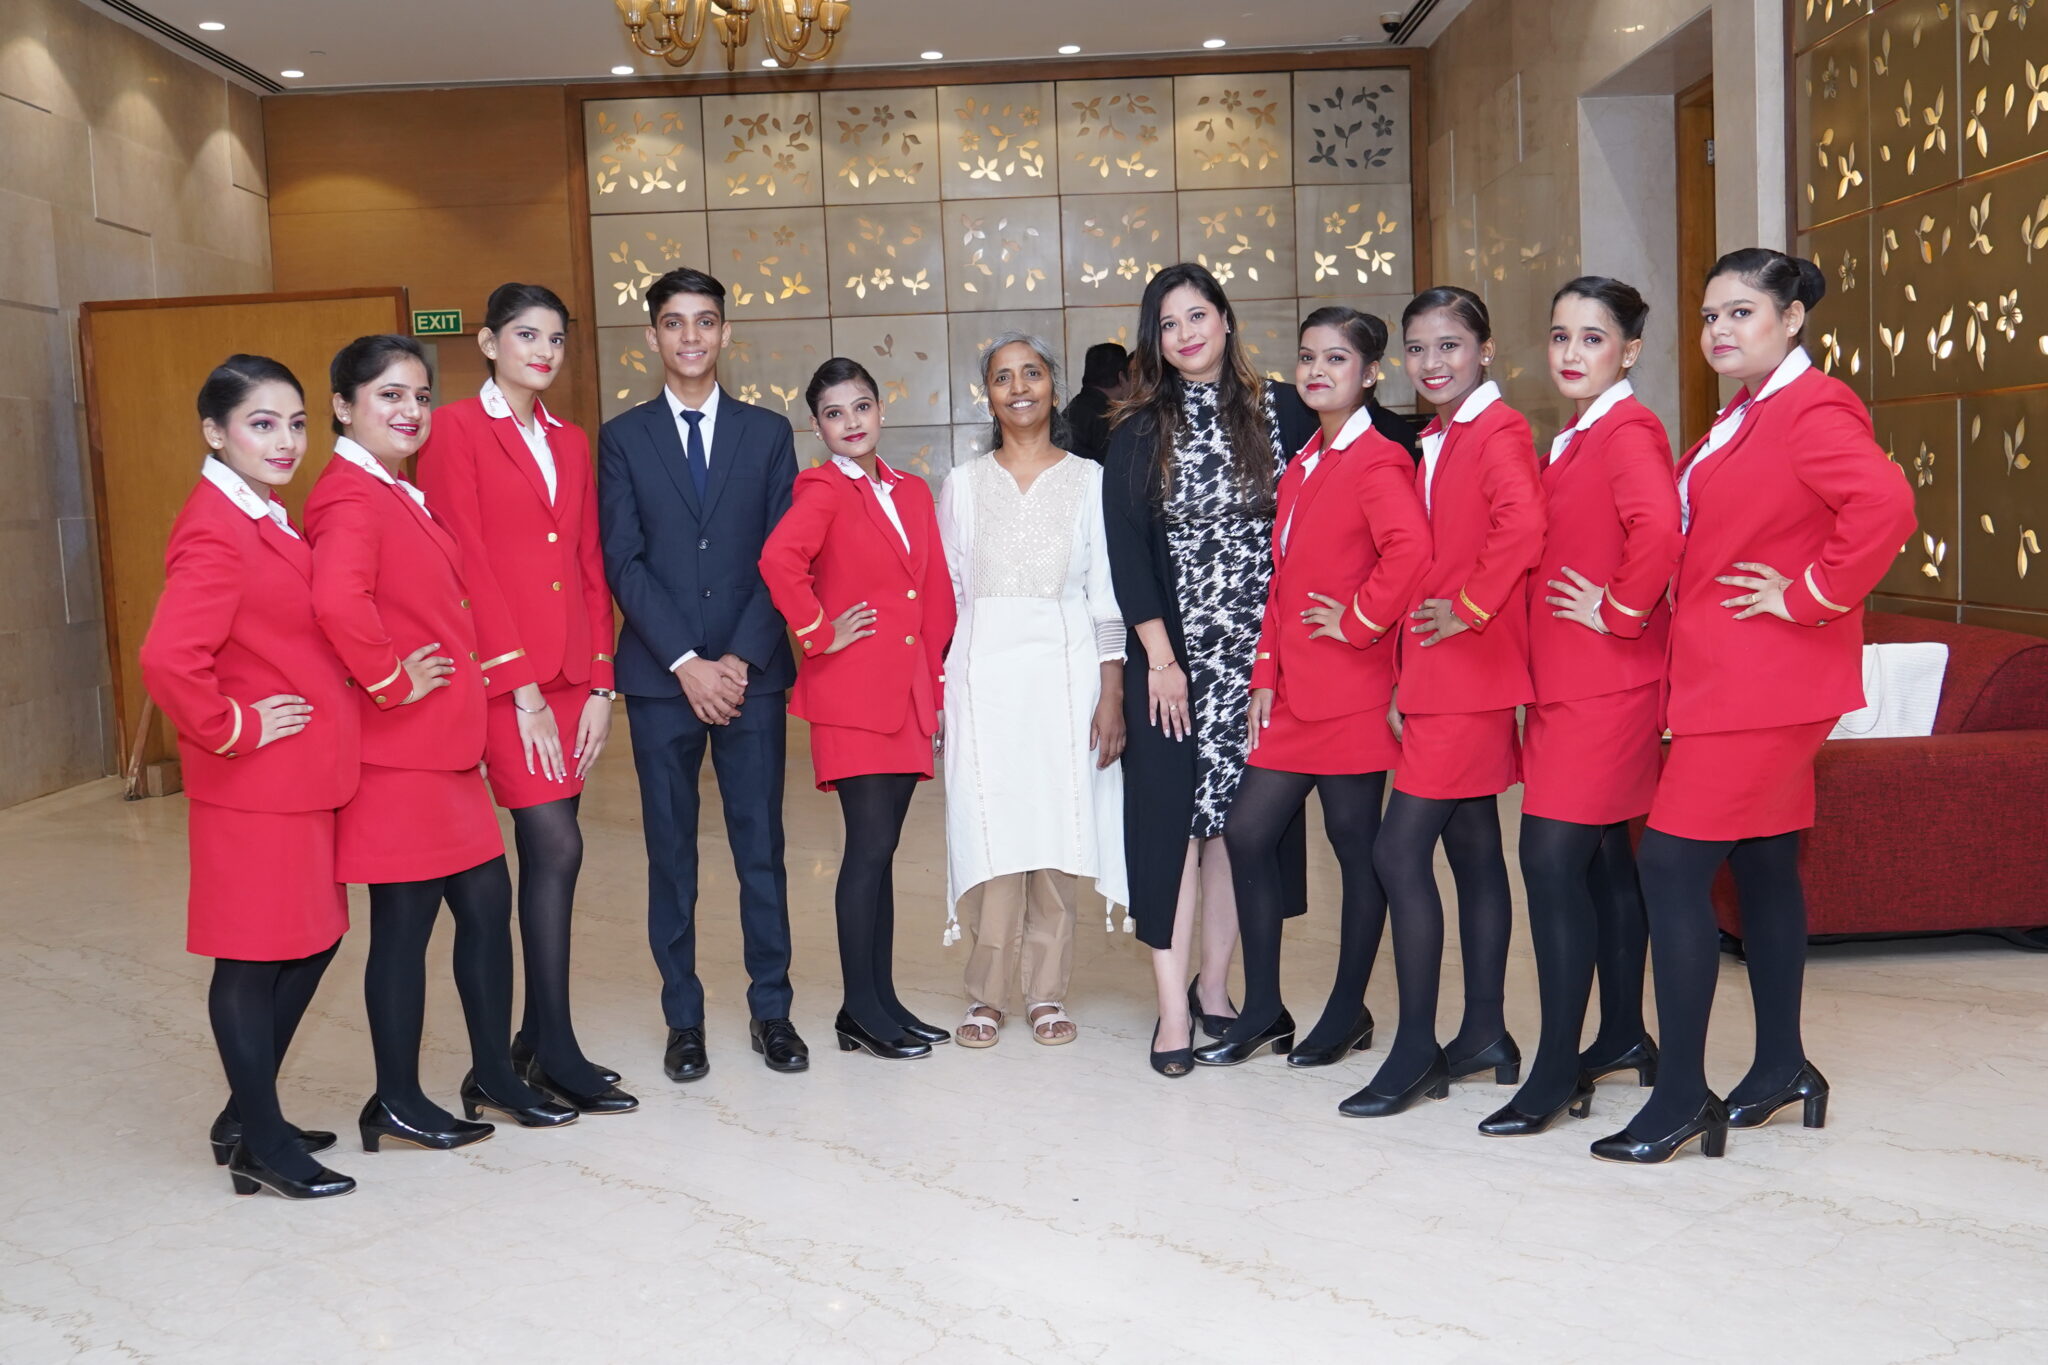 Best Air Hostess Cabin Crew Training Institute-Flying Queen Air Hostess Academy Pitampura Delhi, Air Ticketing and Ground Staff Course Training Institute near me-Flying Queen Cabin Crew Training Institute Pitampura Delhi, No.1 Cabin Crew Training Institute Delhi-Flying Queen Air Hostess Academy Pitampura Delhi, Cabin crew Course after 12th fees details-Flying Queen Air hostess Training Institute Pitampura Delhi